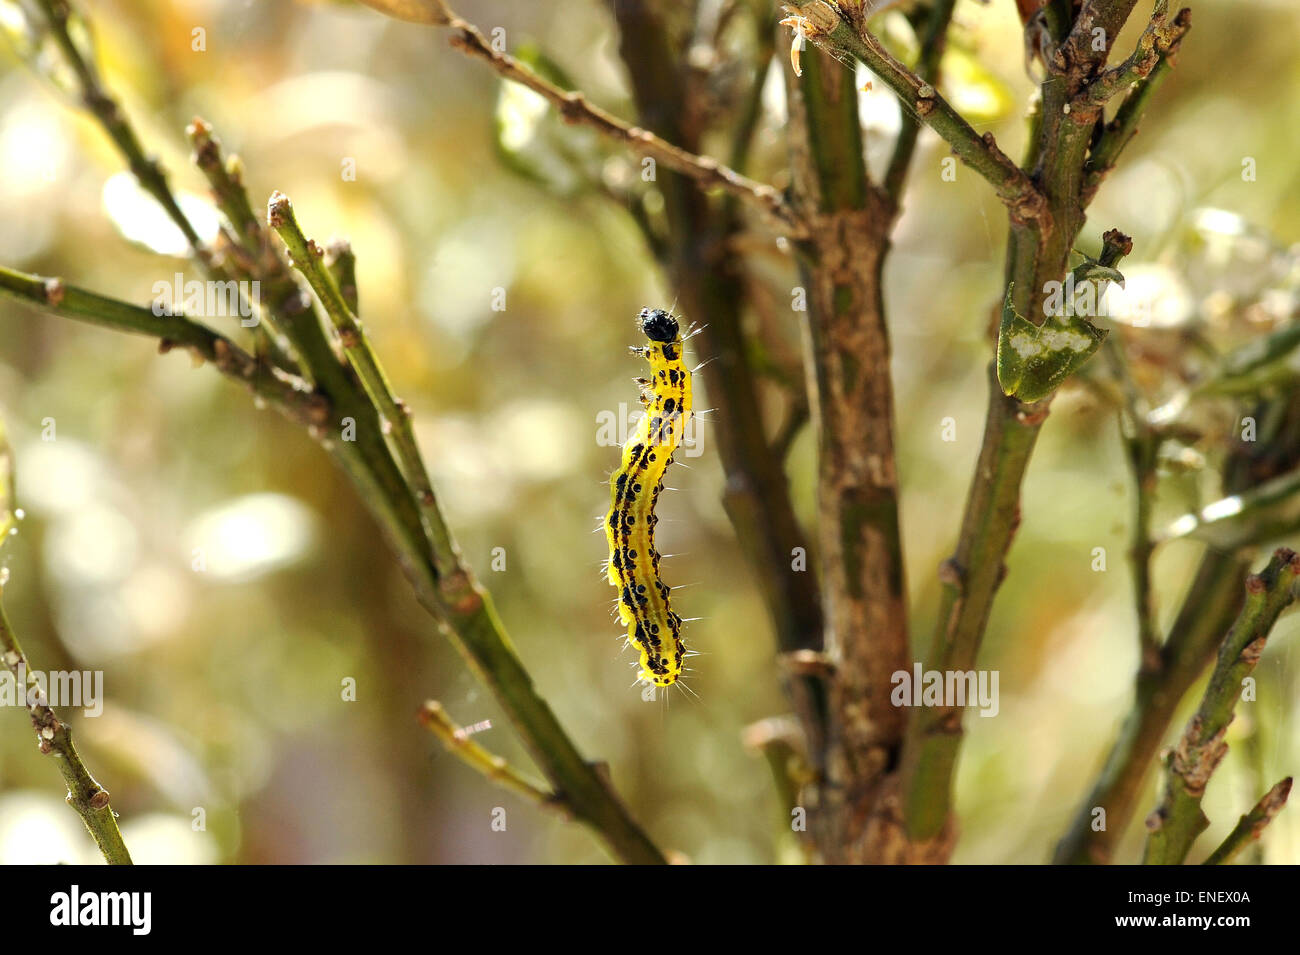 Colorful yellow and black caterpillar, the larva of a moth or butterfly and a voracious garden pest eating the leaves and stems Stock Photo